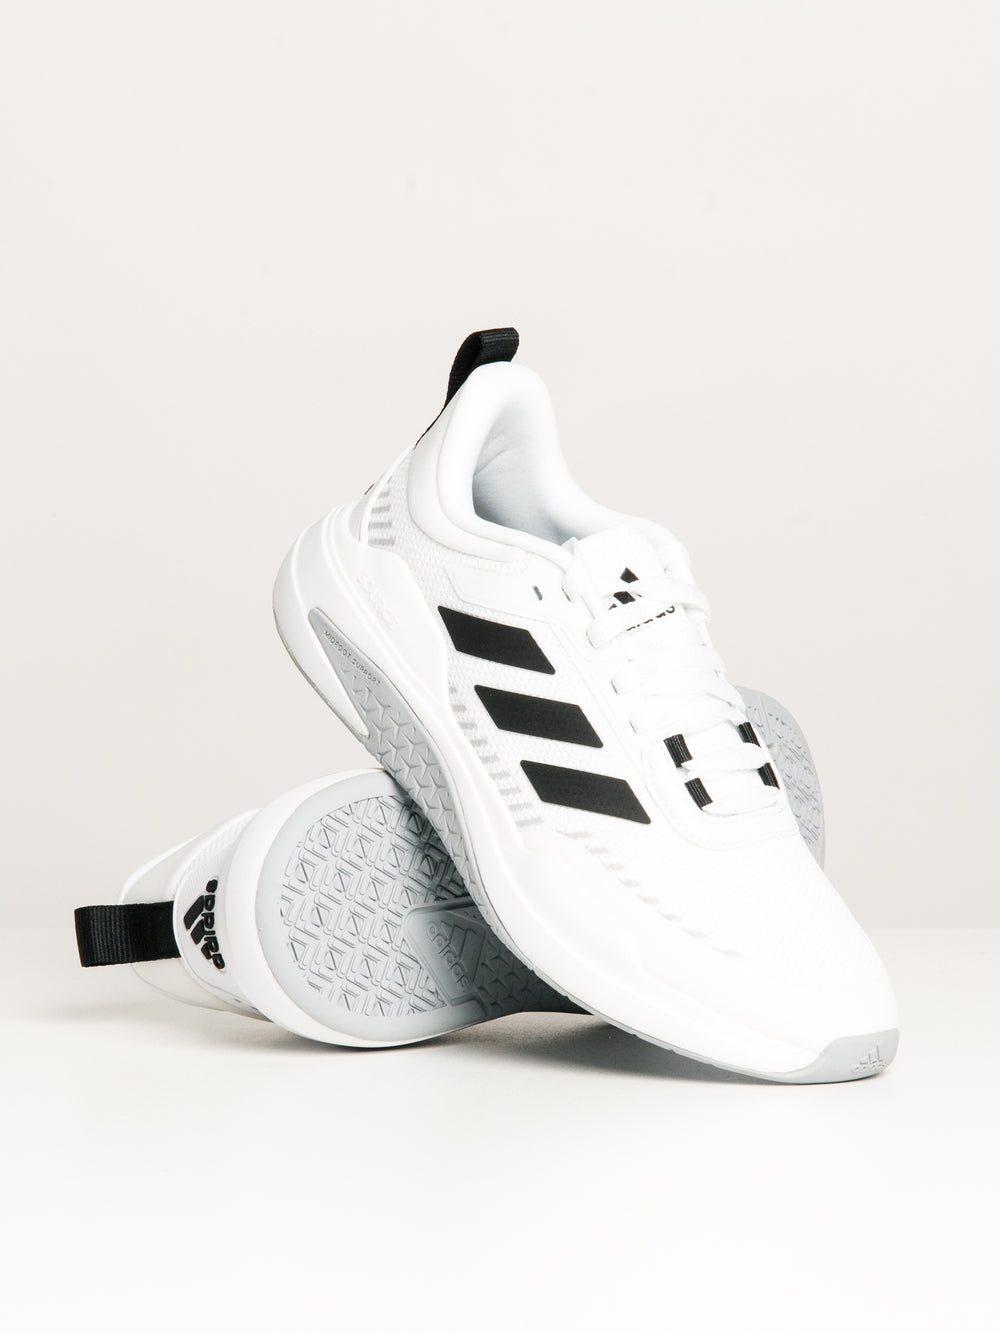 MENS ADIDAS LUX SNEAKERS - CLEARANCE